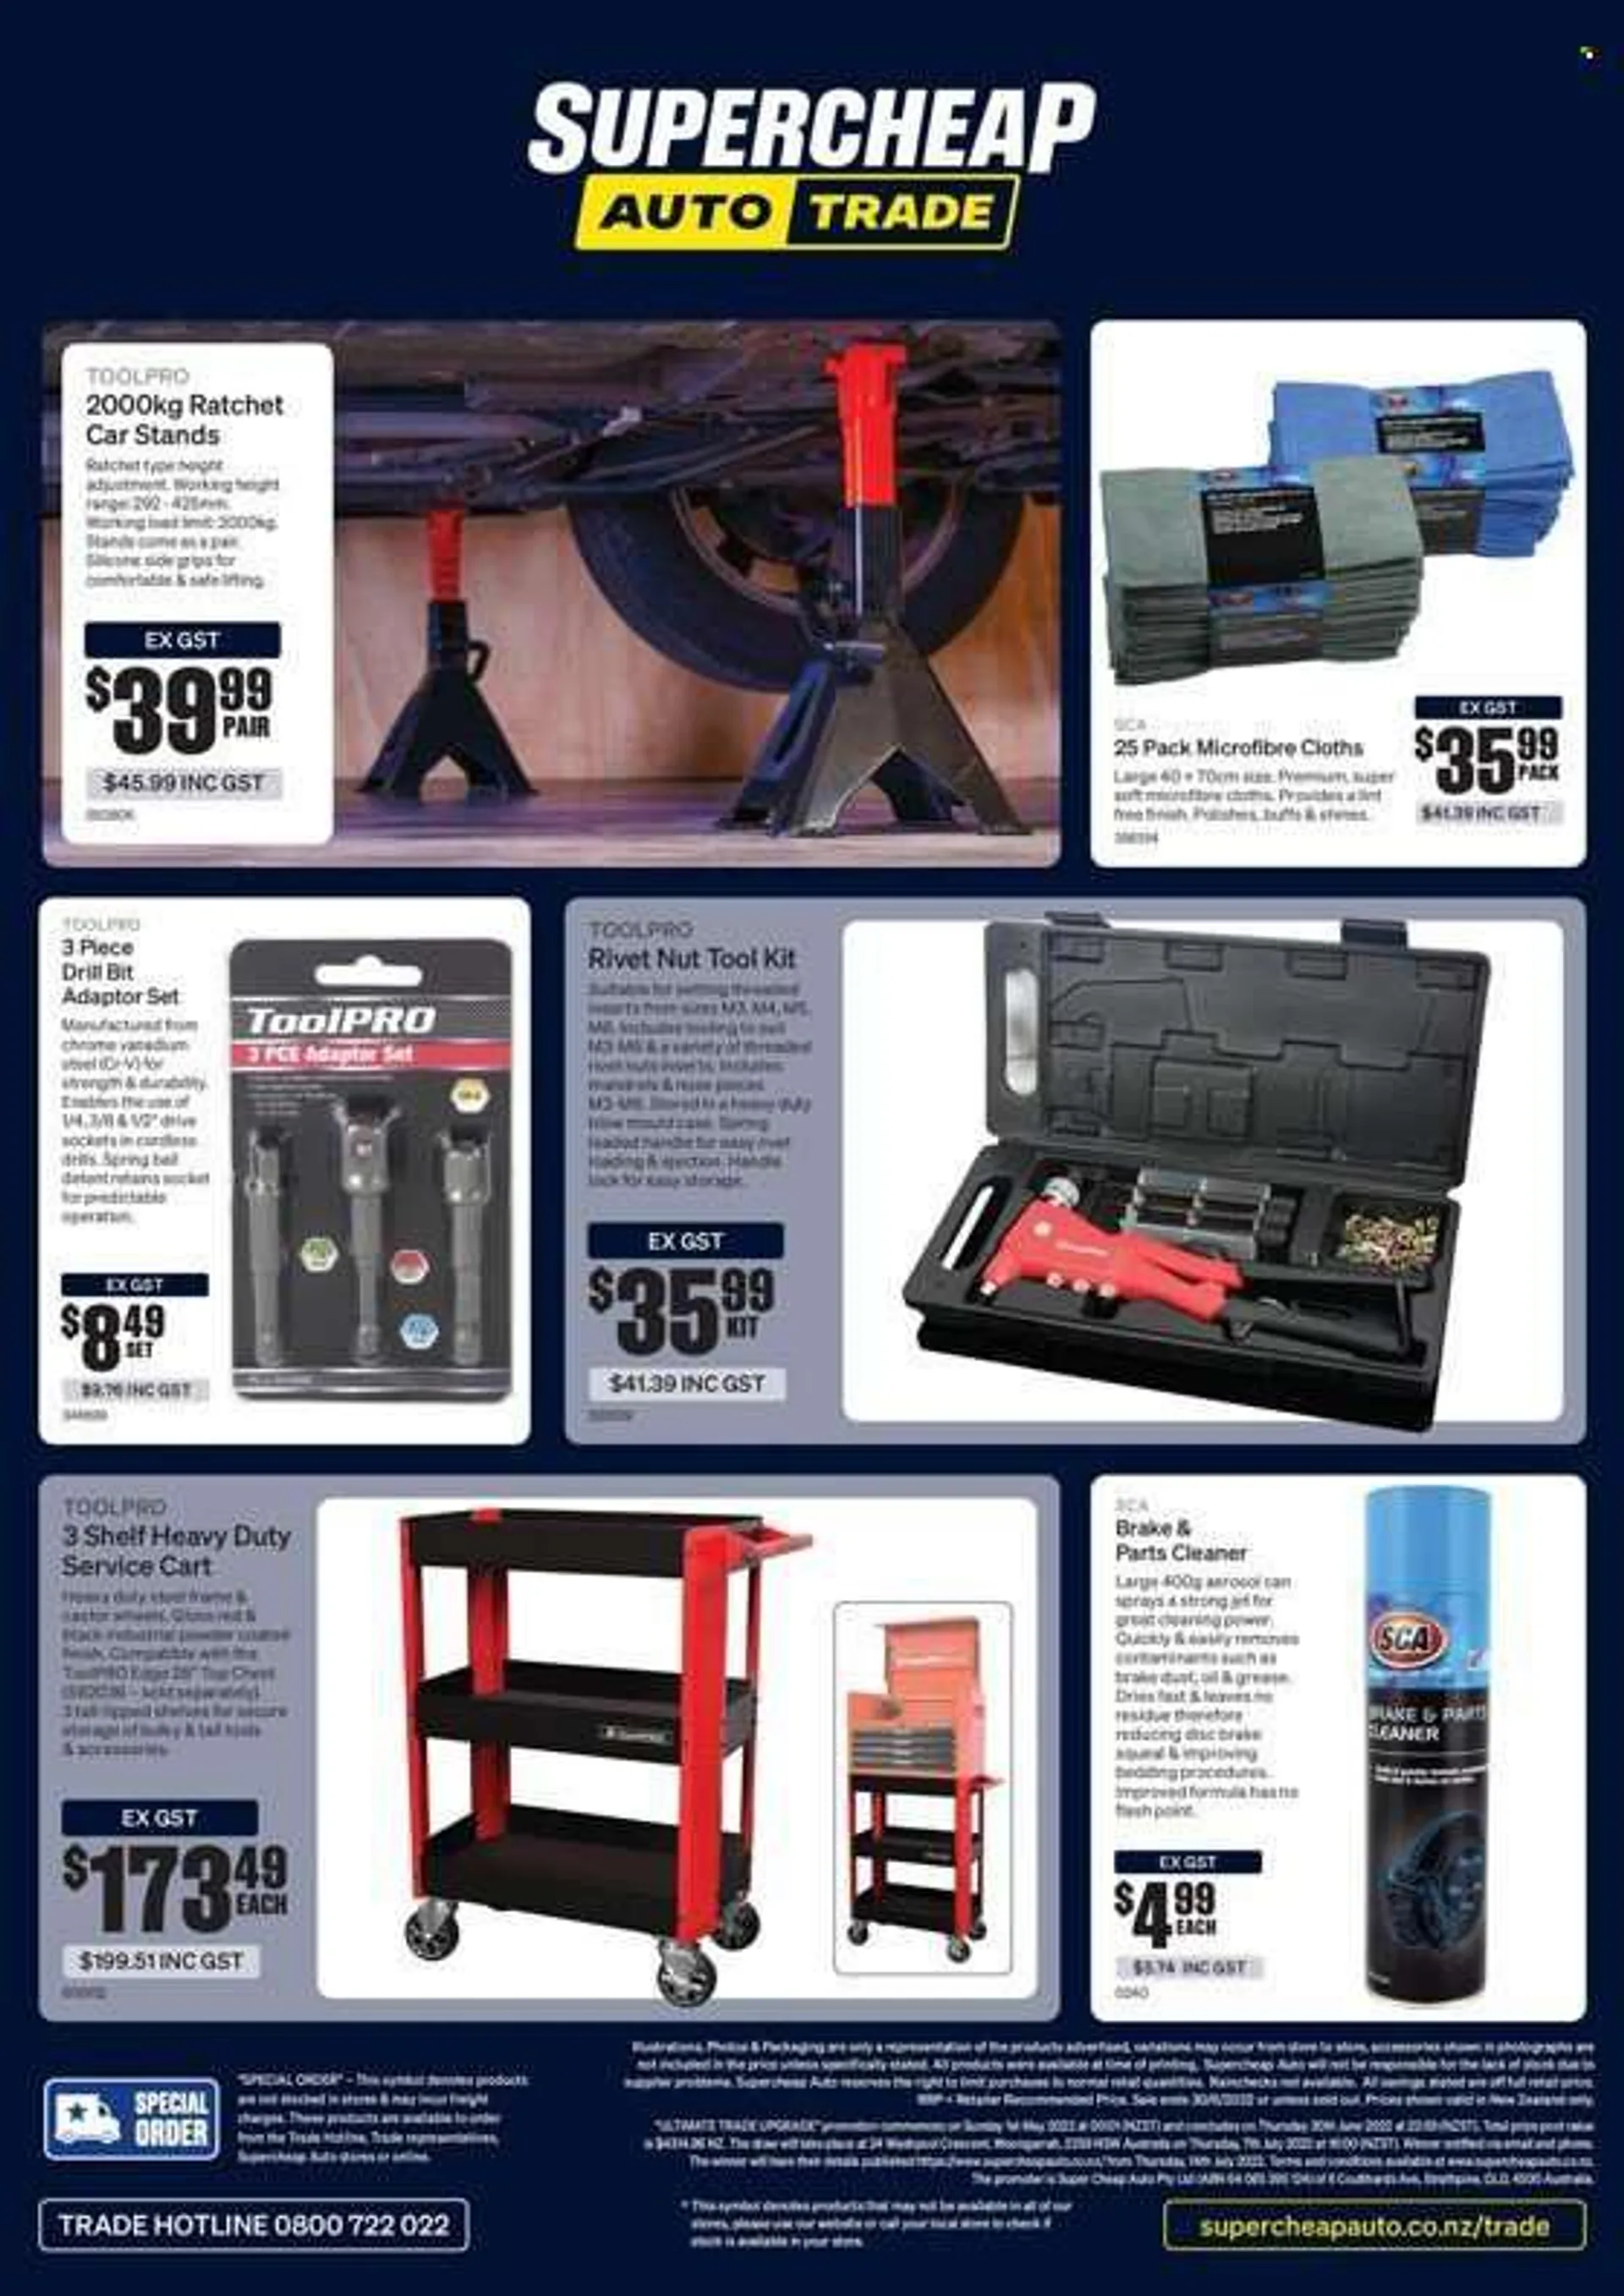 SuperCheap Auto mailer - 01.05.2022 - 30.06.2022. - 1 May 30 June 2022 - Page 8